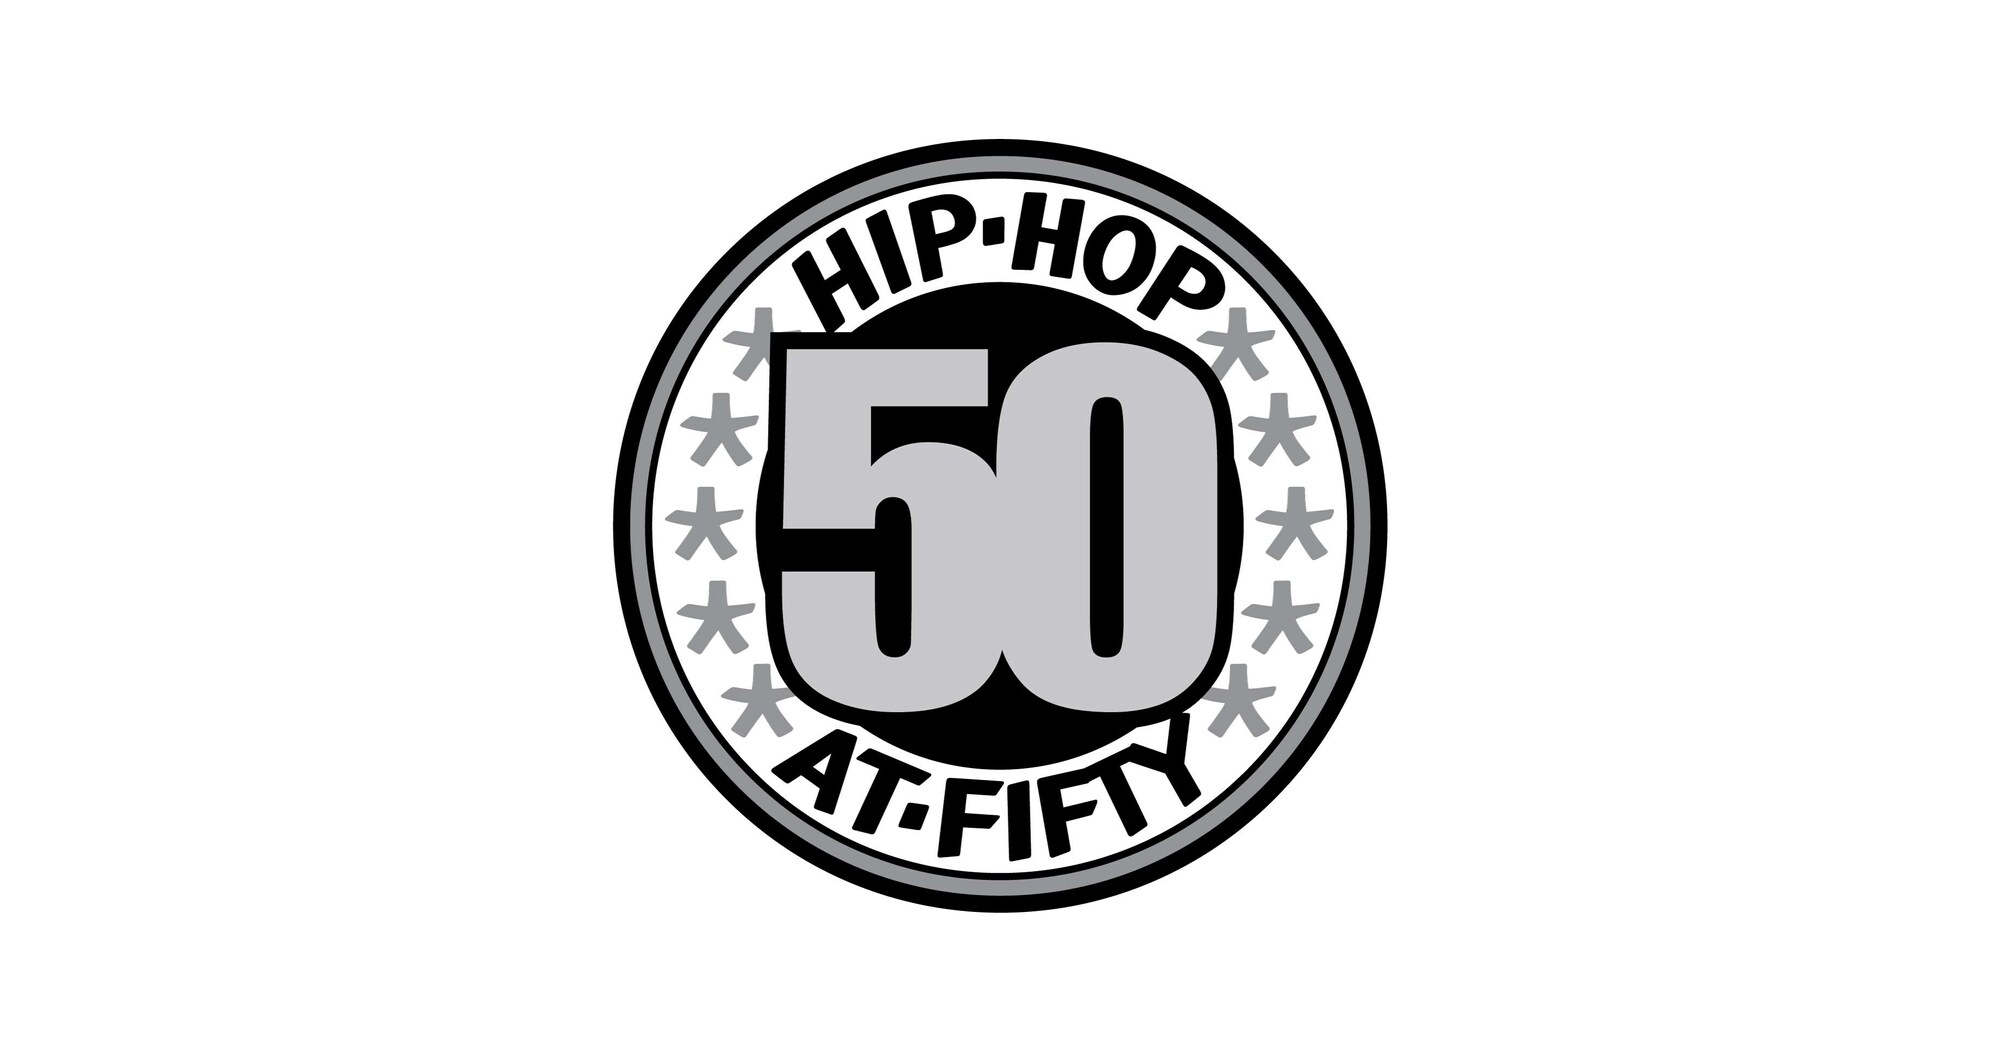 UMe CELEBRATES FIVE DECADES OF RAP WITH NEW 'HIP HOP AT 50' LOGO ...